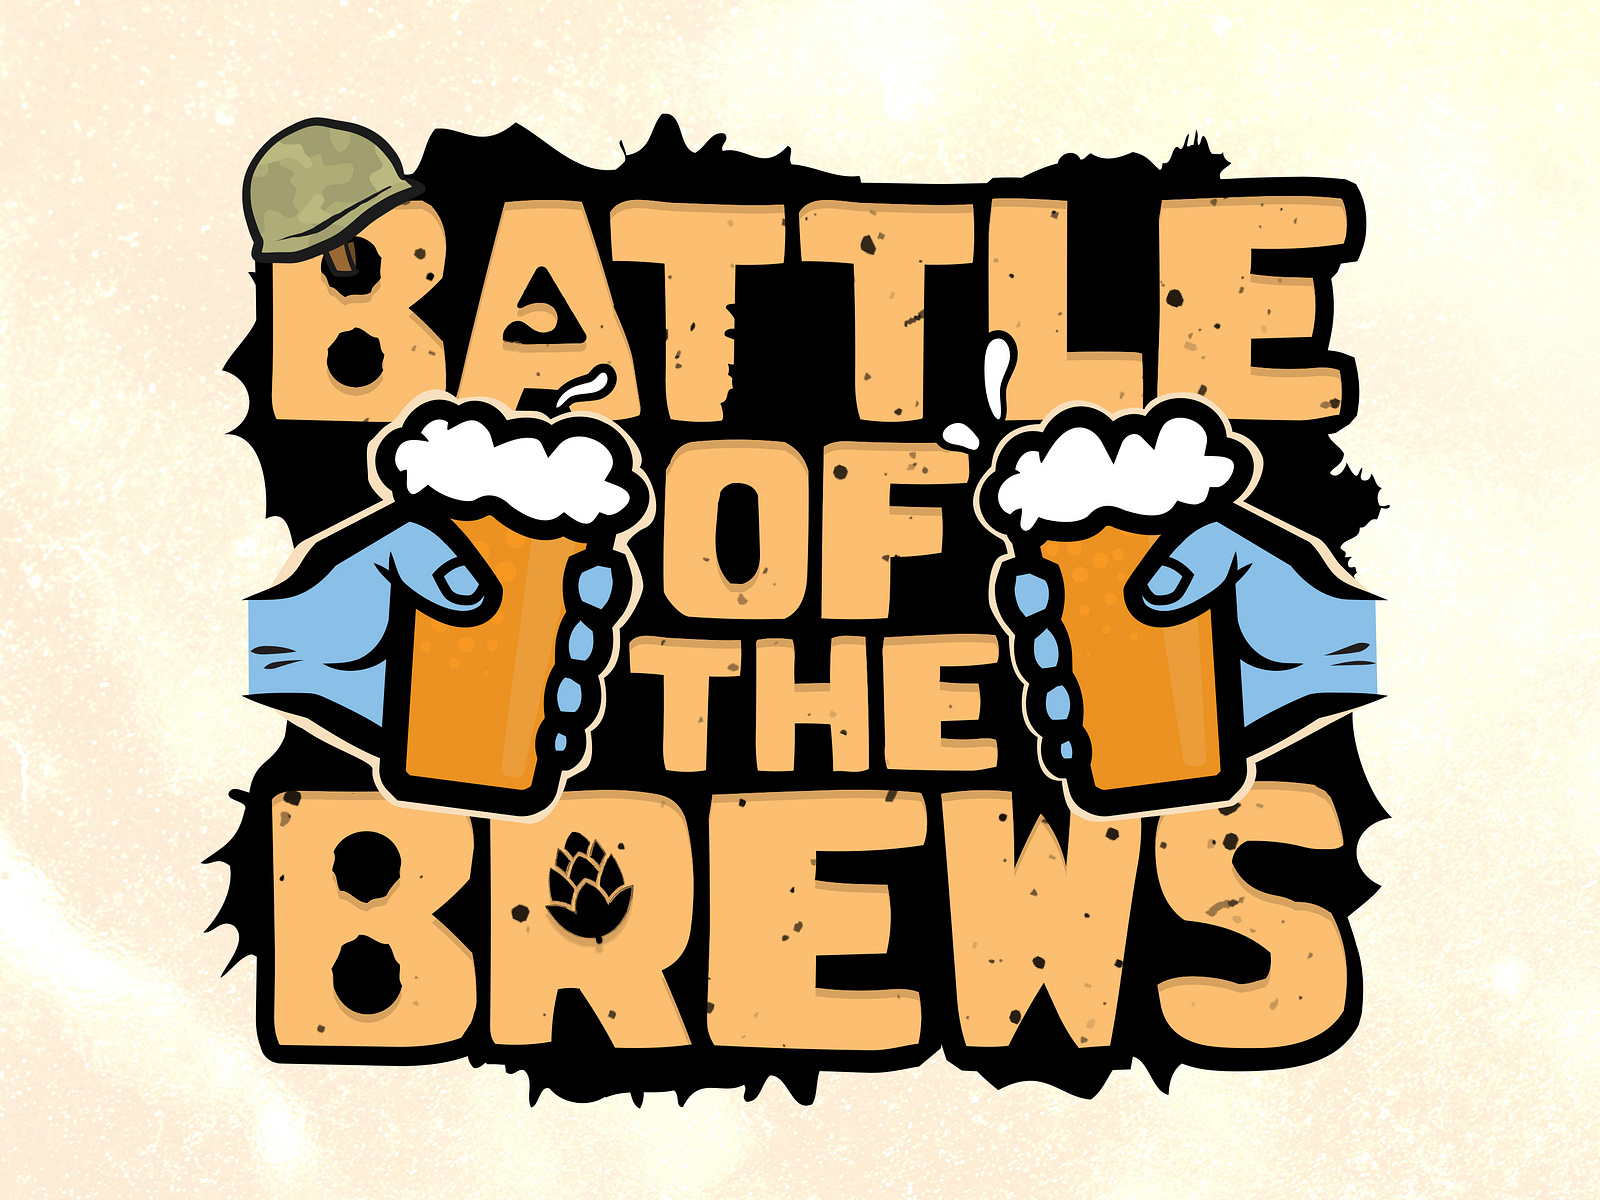 Battle of the Brews • Logo & Poster by Alex Wheeler on Dribbble